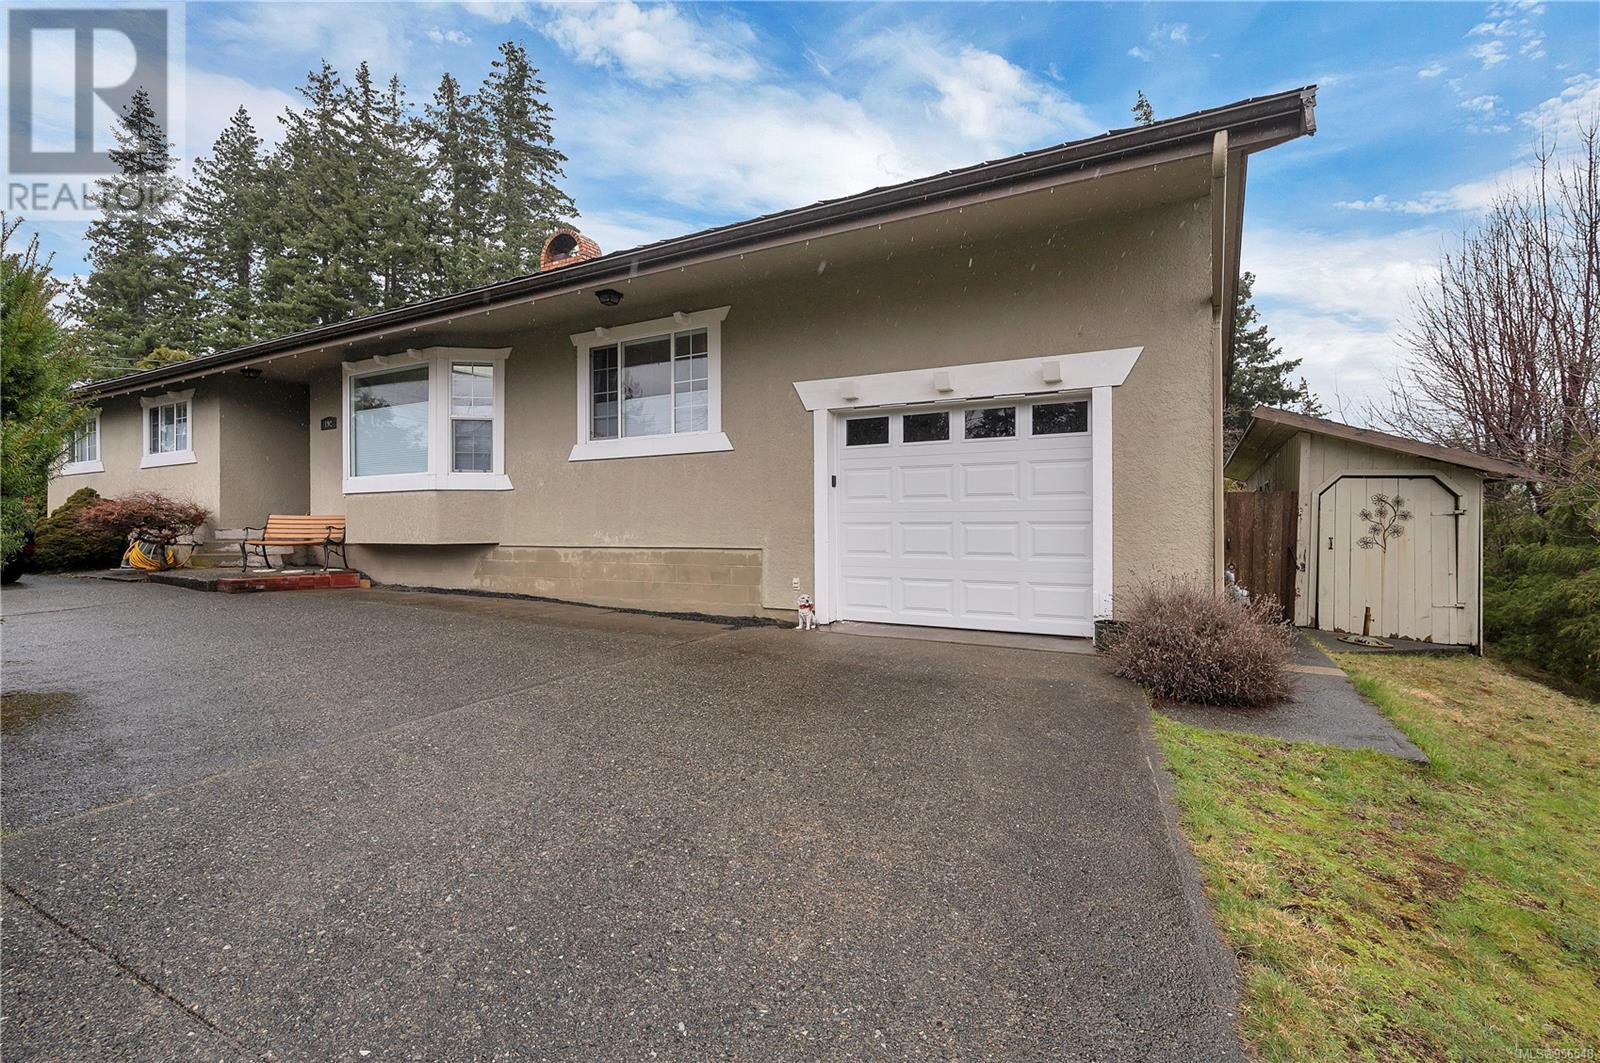 192 Rockland Rd, Campbell River